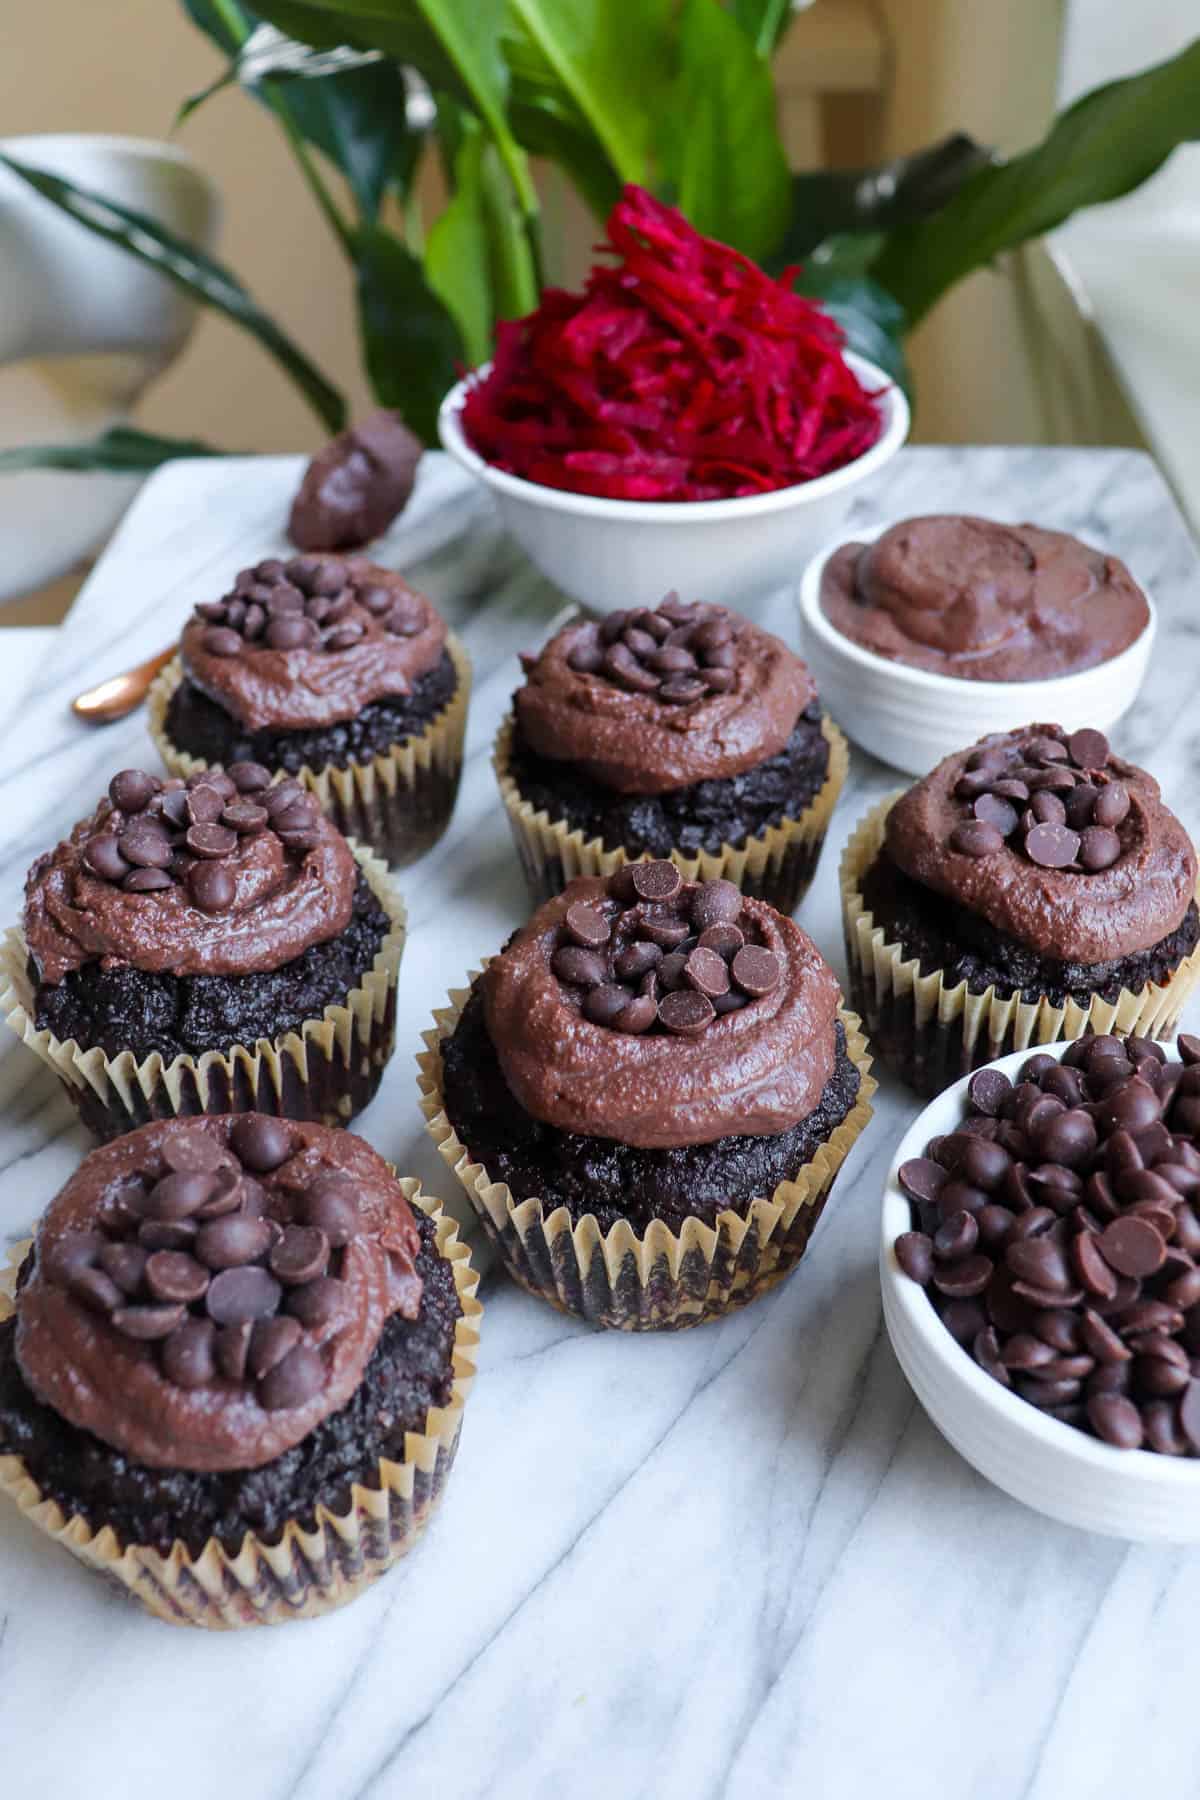 Chocolate muffins with chocolate frosting on top.